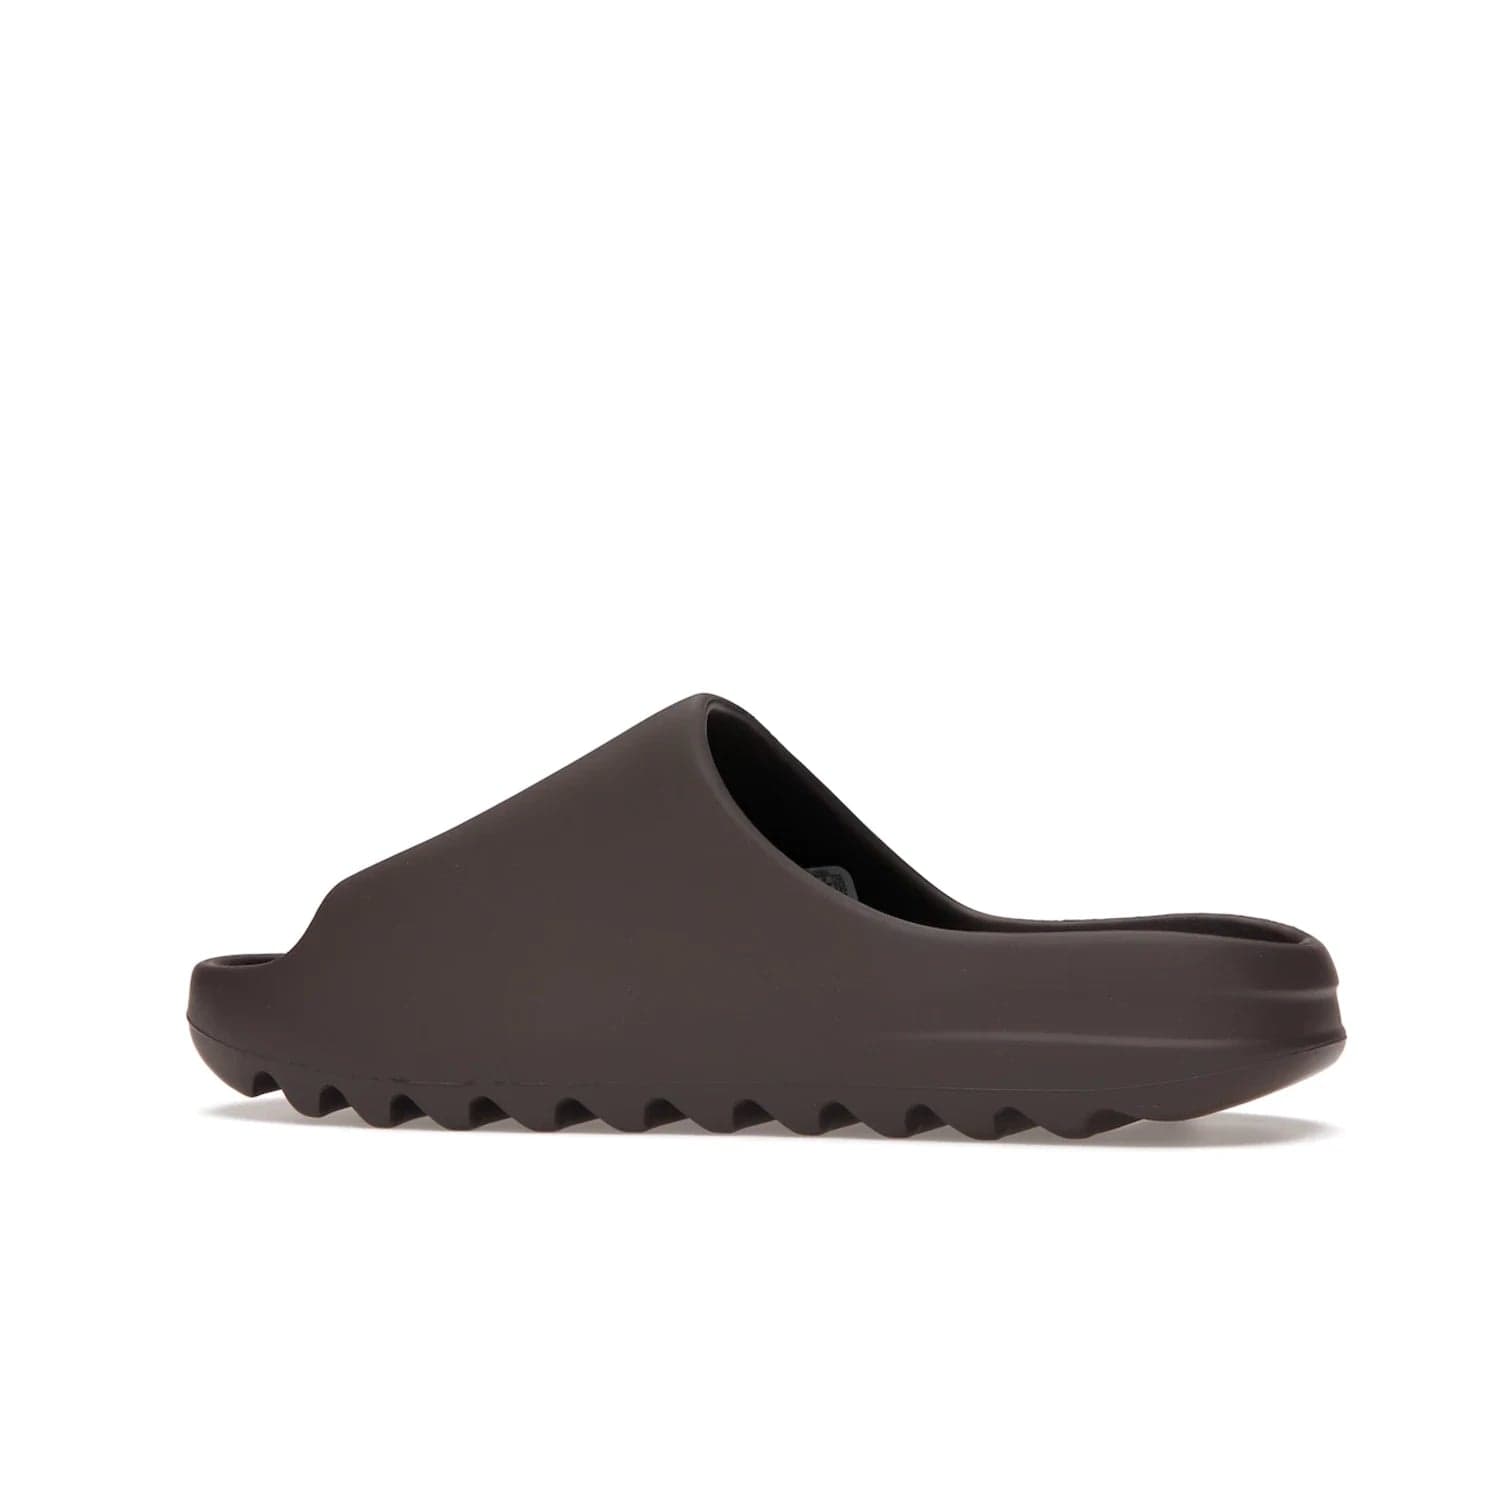 adidas Yeezy Slide Soot - Image 21 - Only at www.BallersClubKickz.com - Shop the Yeezy Slide Soot sneaker by Adidas, a sleek blend of form and function. Monochrome silhouette in Soot/Soot/Soot. Lightweight EVA foam offers comfort and durability. Get the must-have style today.